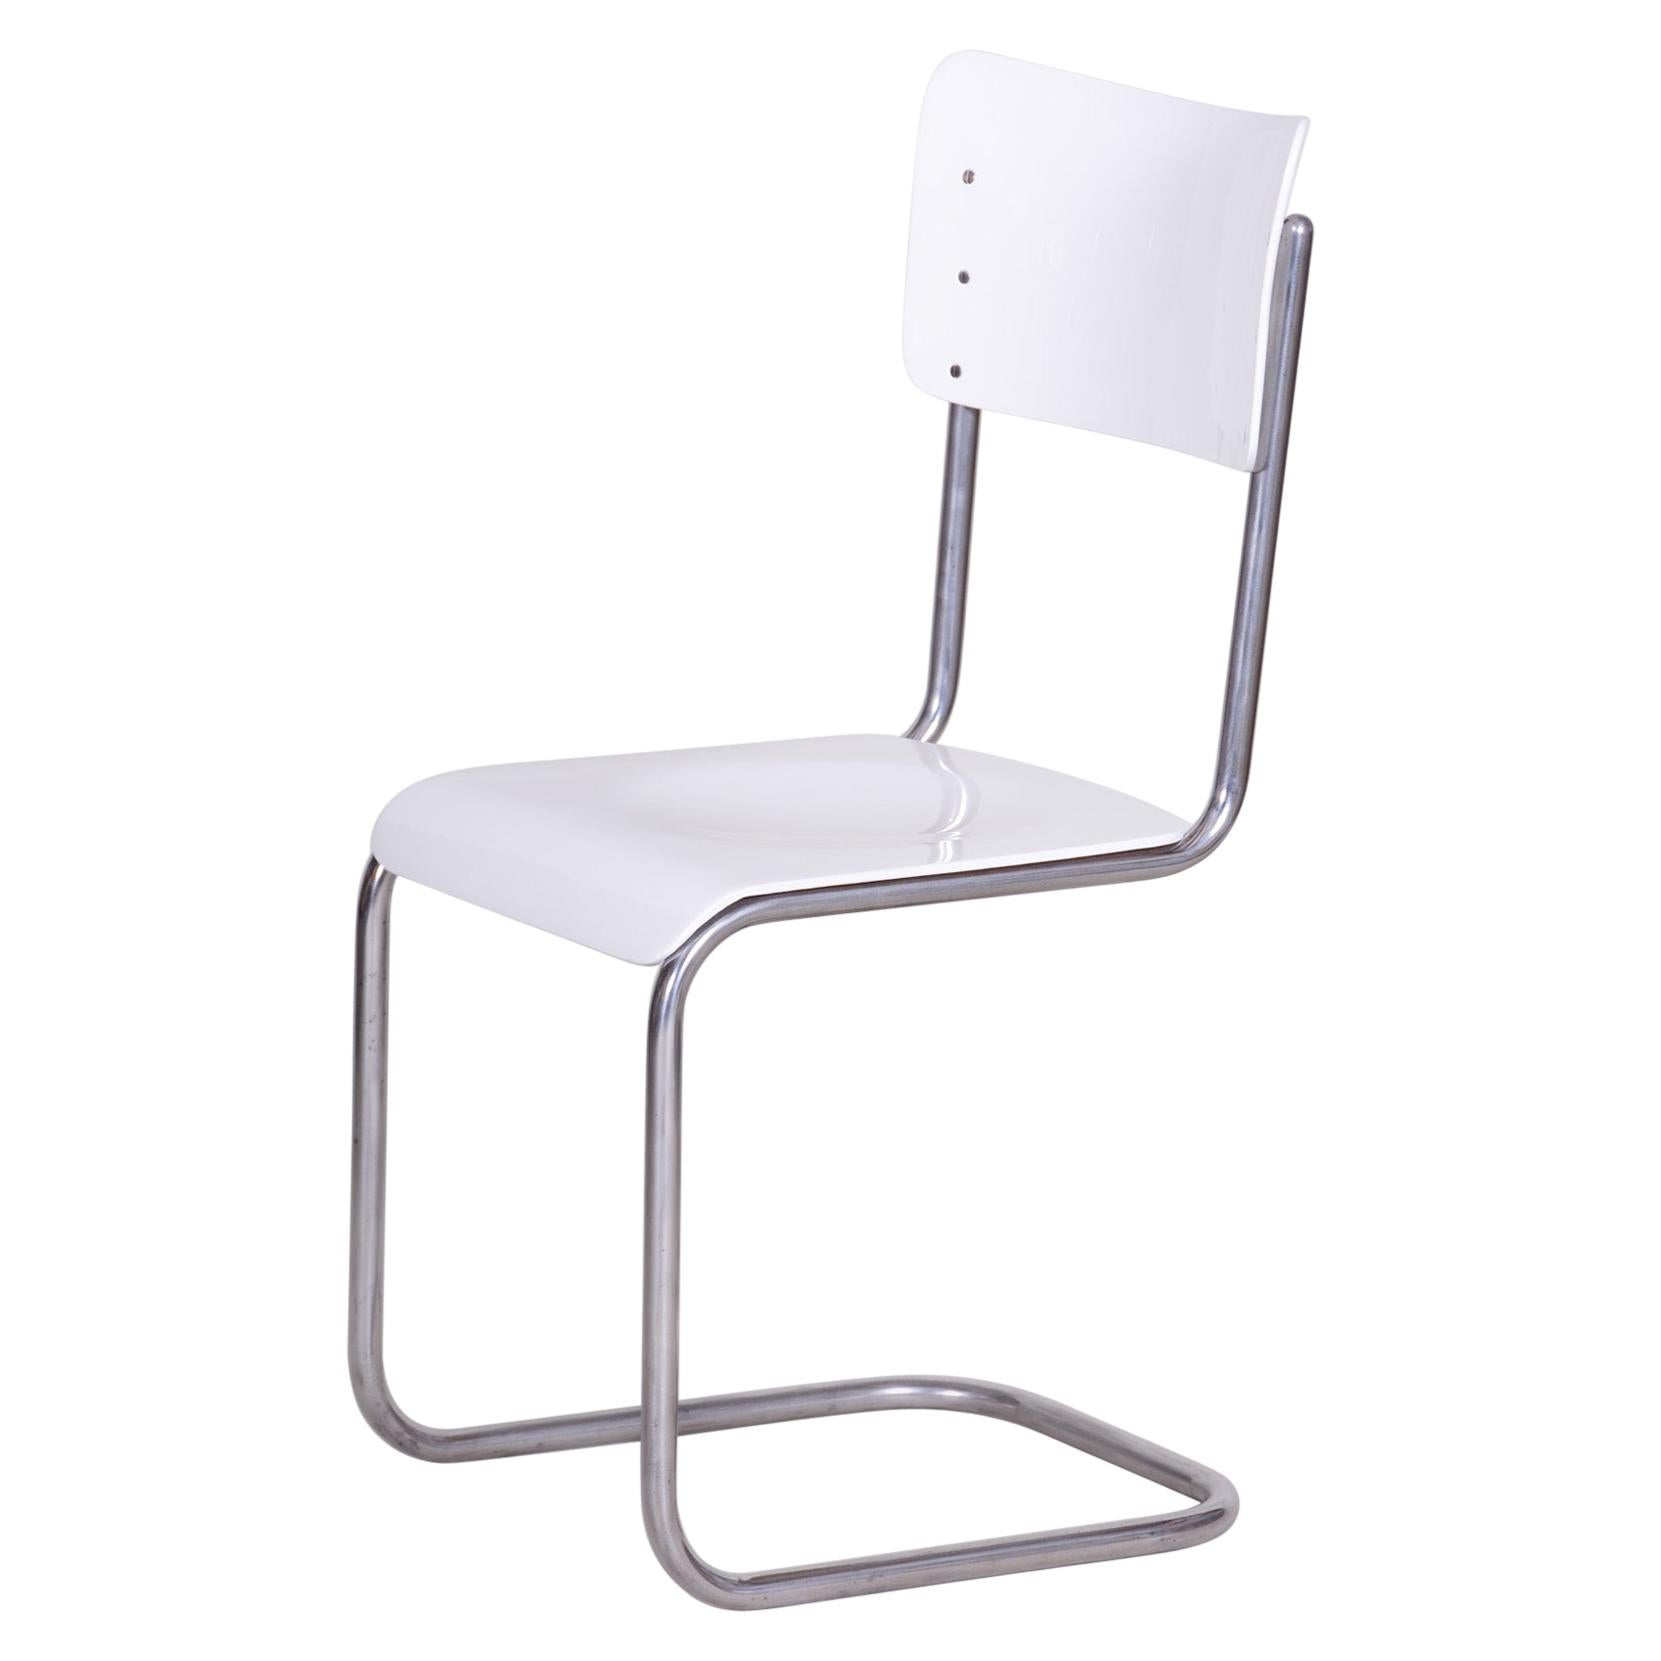 Restored White Vintage Bauhaus Chair Manufactured by Vichr a Spol, 1930-1939 For Sale